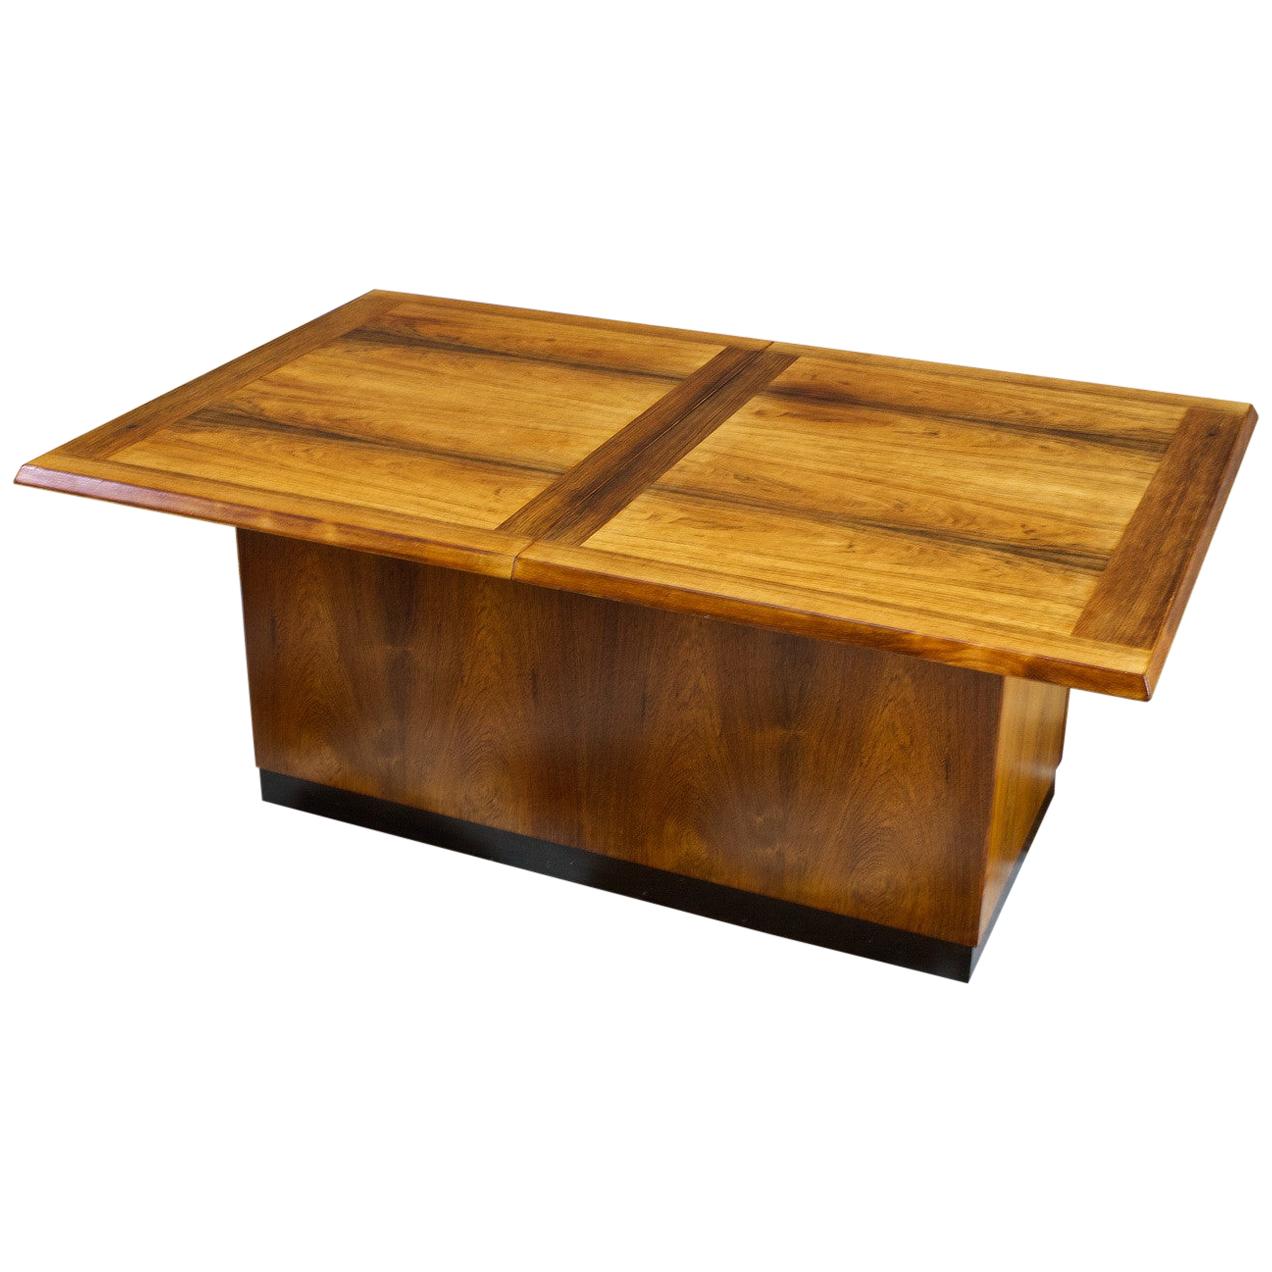 Luxury Danish Rosewood Coffee Table with Dry Bar 1960s vintage